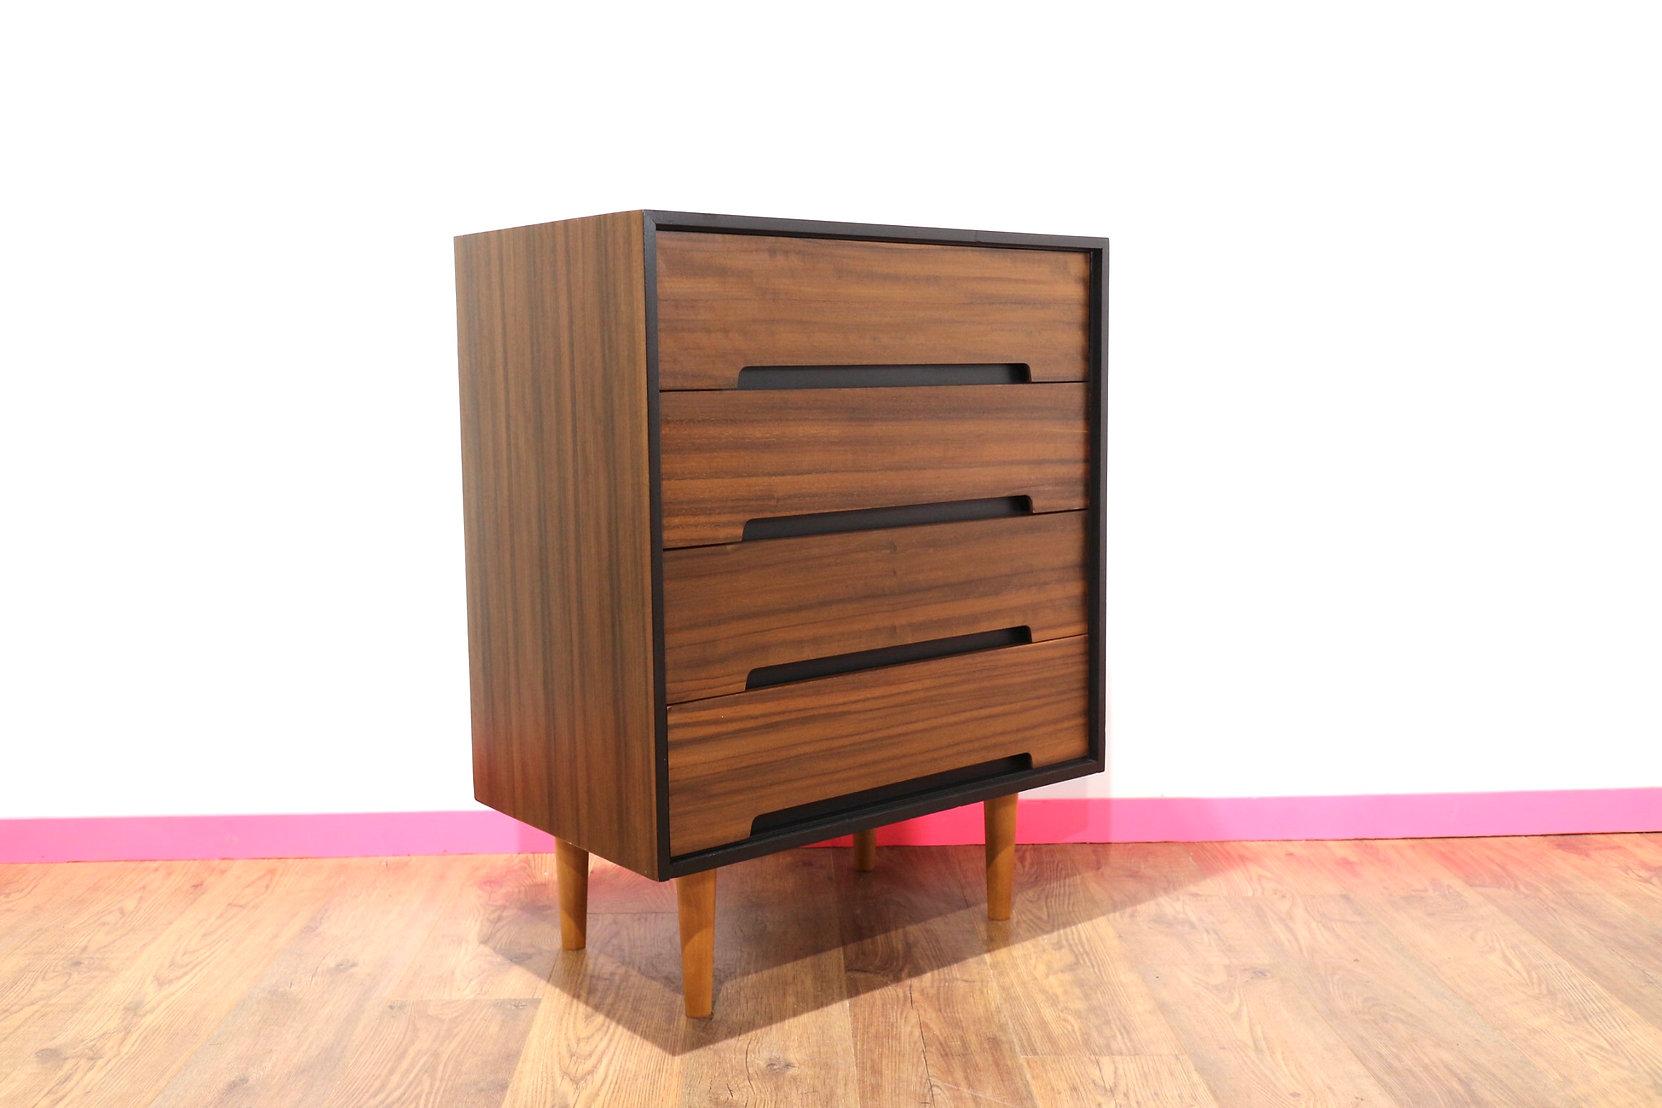 A stunning Mid-Century Modern vintage dresser by British furniture maker Stag in the 1960s. Made in walnut these are real stand out piece of furniture and have a fabulous Minimalist look 

 

Dimensions 

w30 d18 h38

 

Condition

